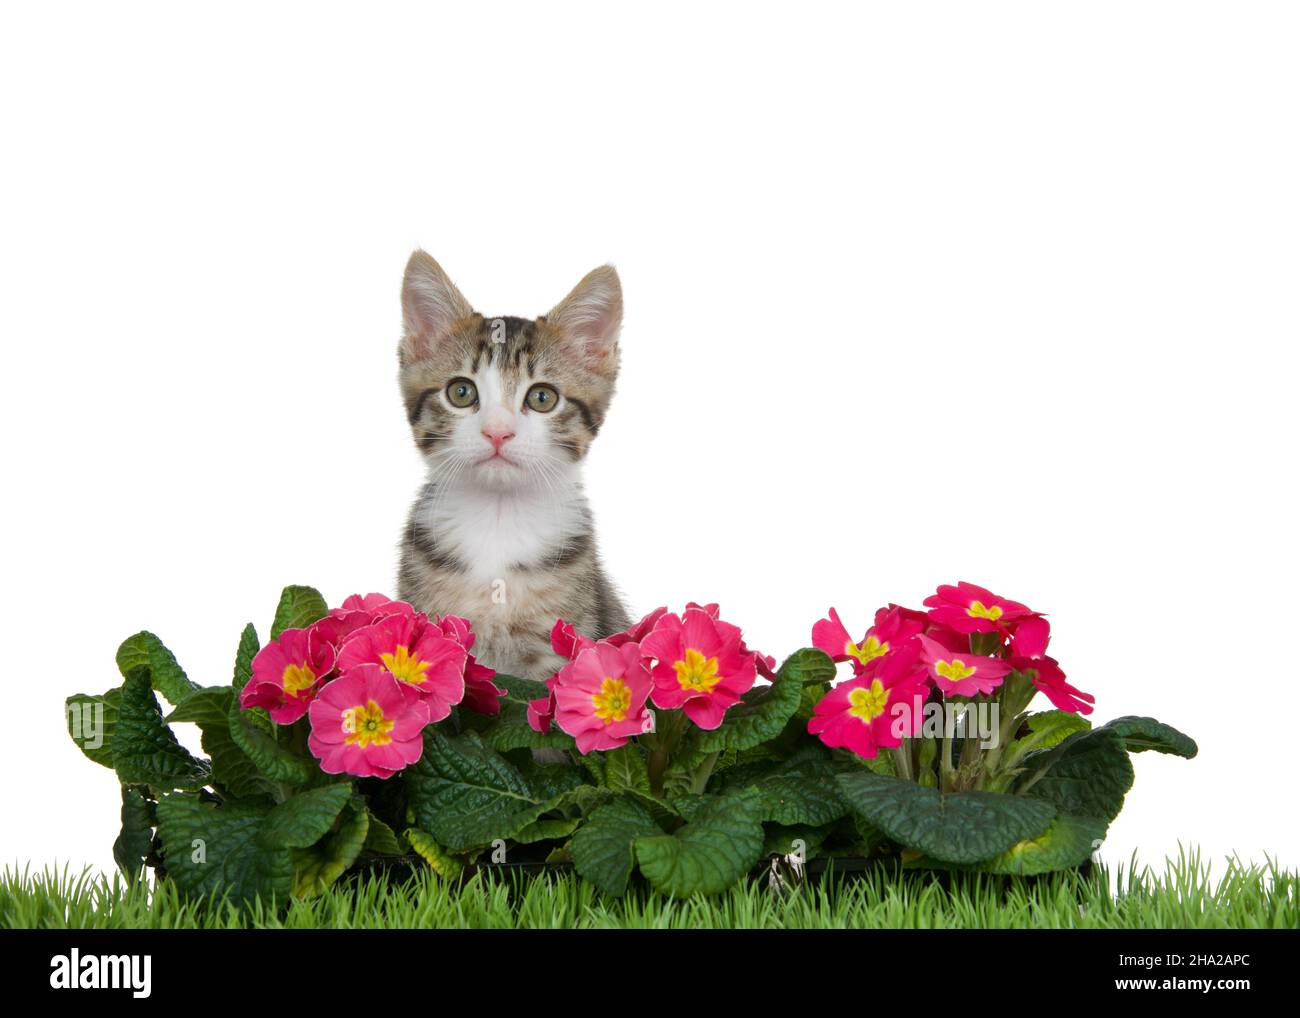 Portrait of a grey and white tabby kitten sitting behind pink and yellow primrose flowers with green grass in front, isolated on white. Stock Photo